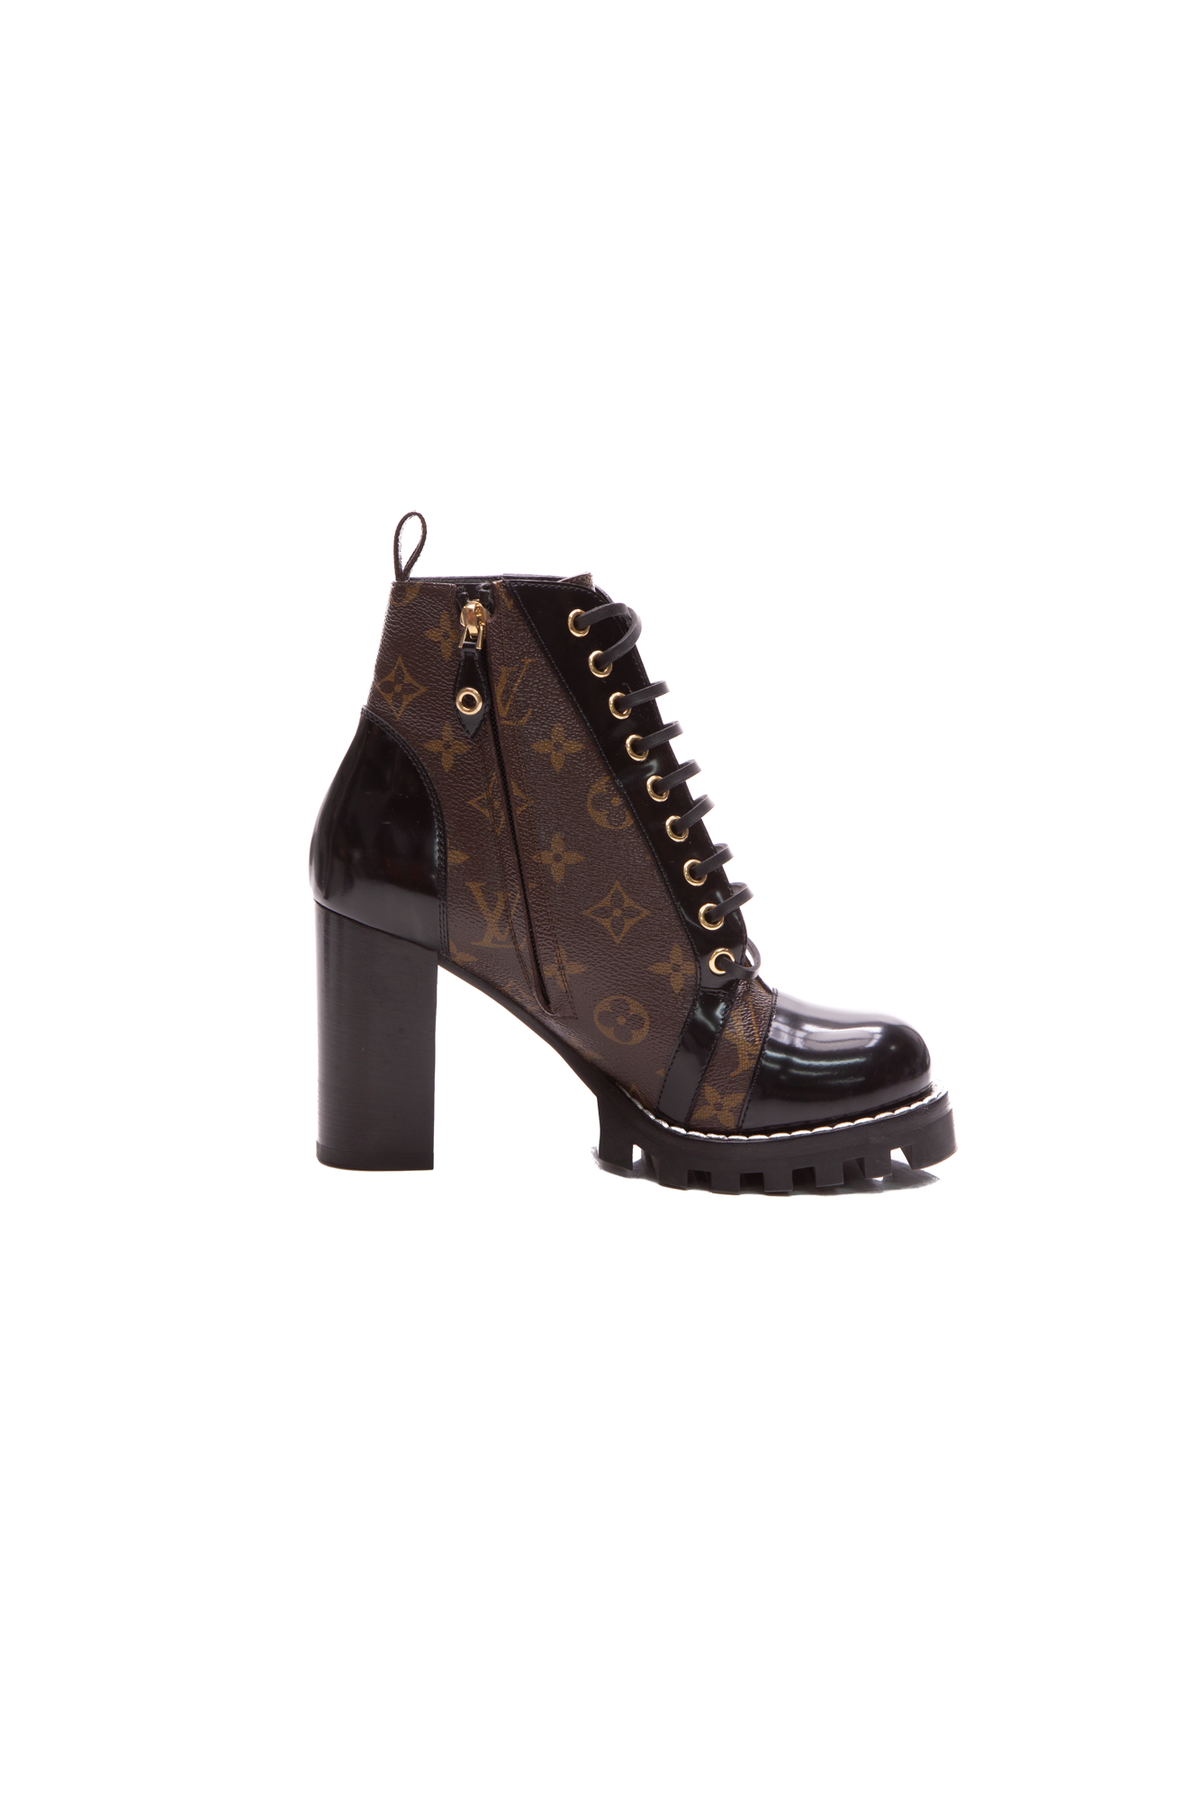 Louis Vuitton Star Trail Ankle Boots - Size 38 - Couture USA